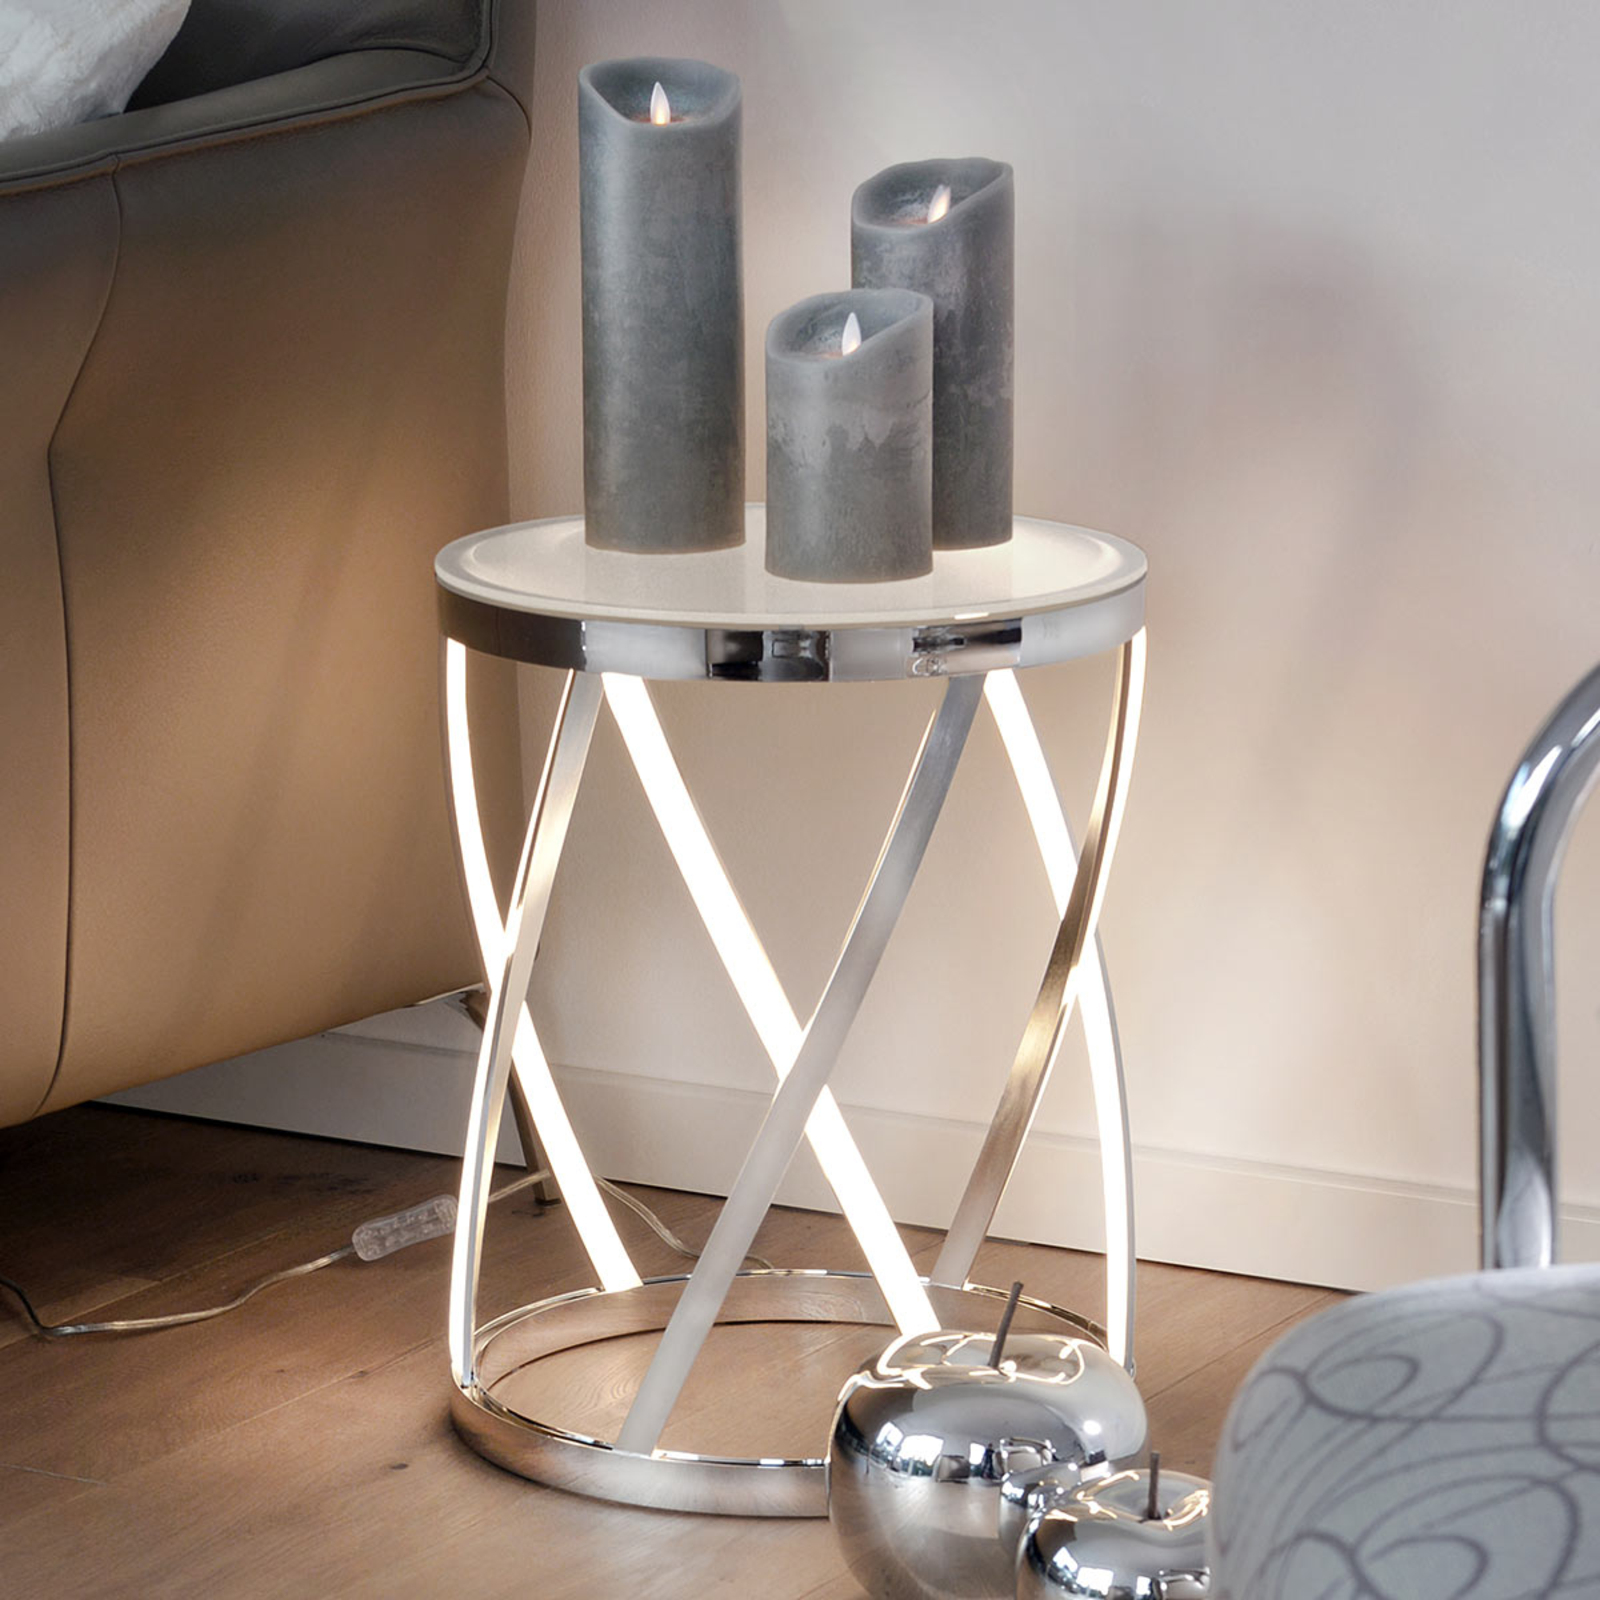 Rumpu - light source and side table in one